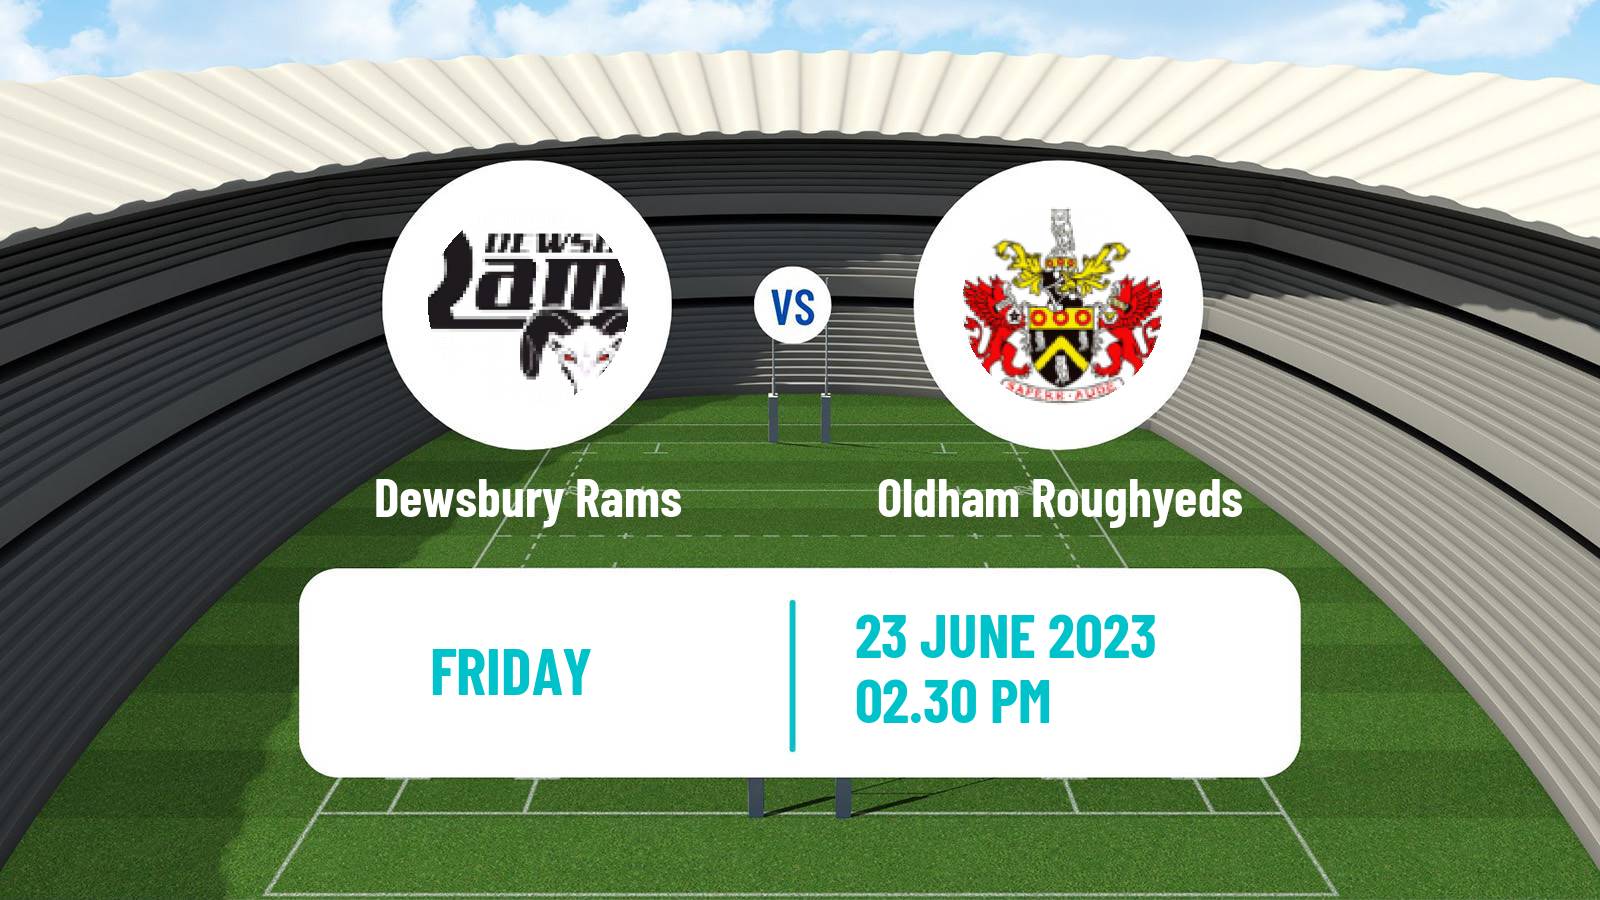 Rugby league English League 1 Rugby League Dewsbury Rams - Oldham Roughyeds